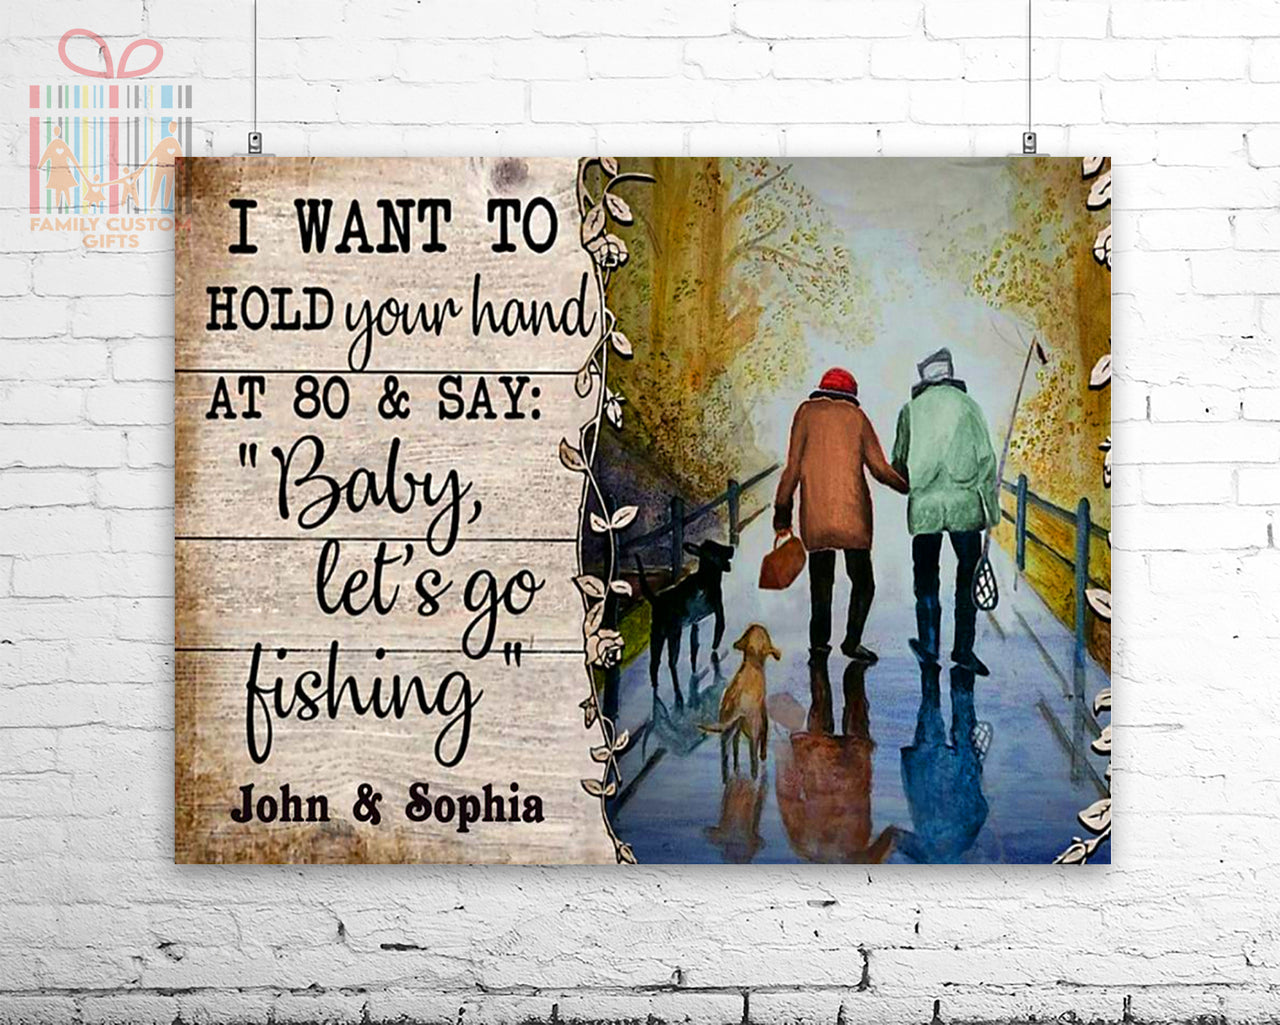 Custom Poster Prints Wall Art Fishing Hold You Hand Personalized Gifts Wall Decor - Gift for Her & Him